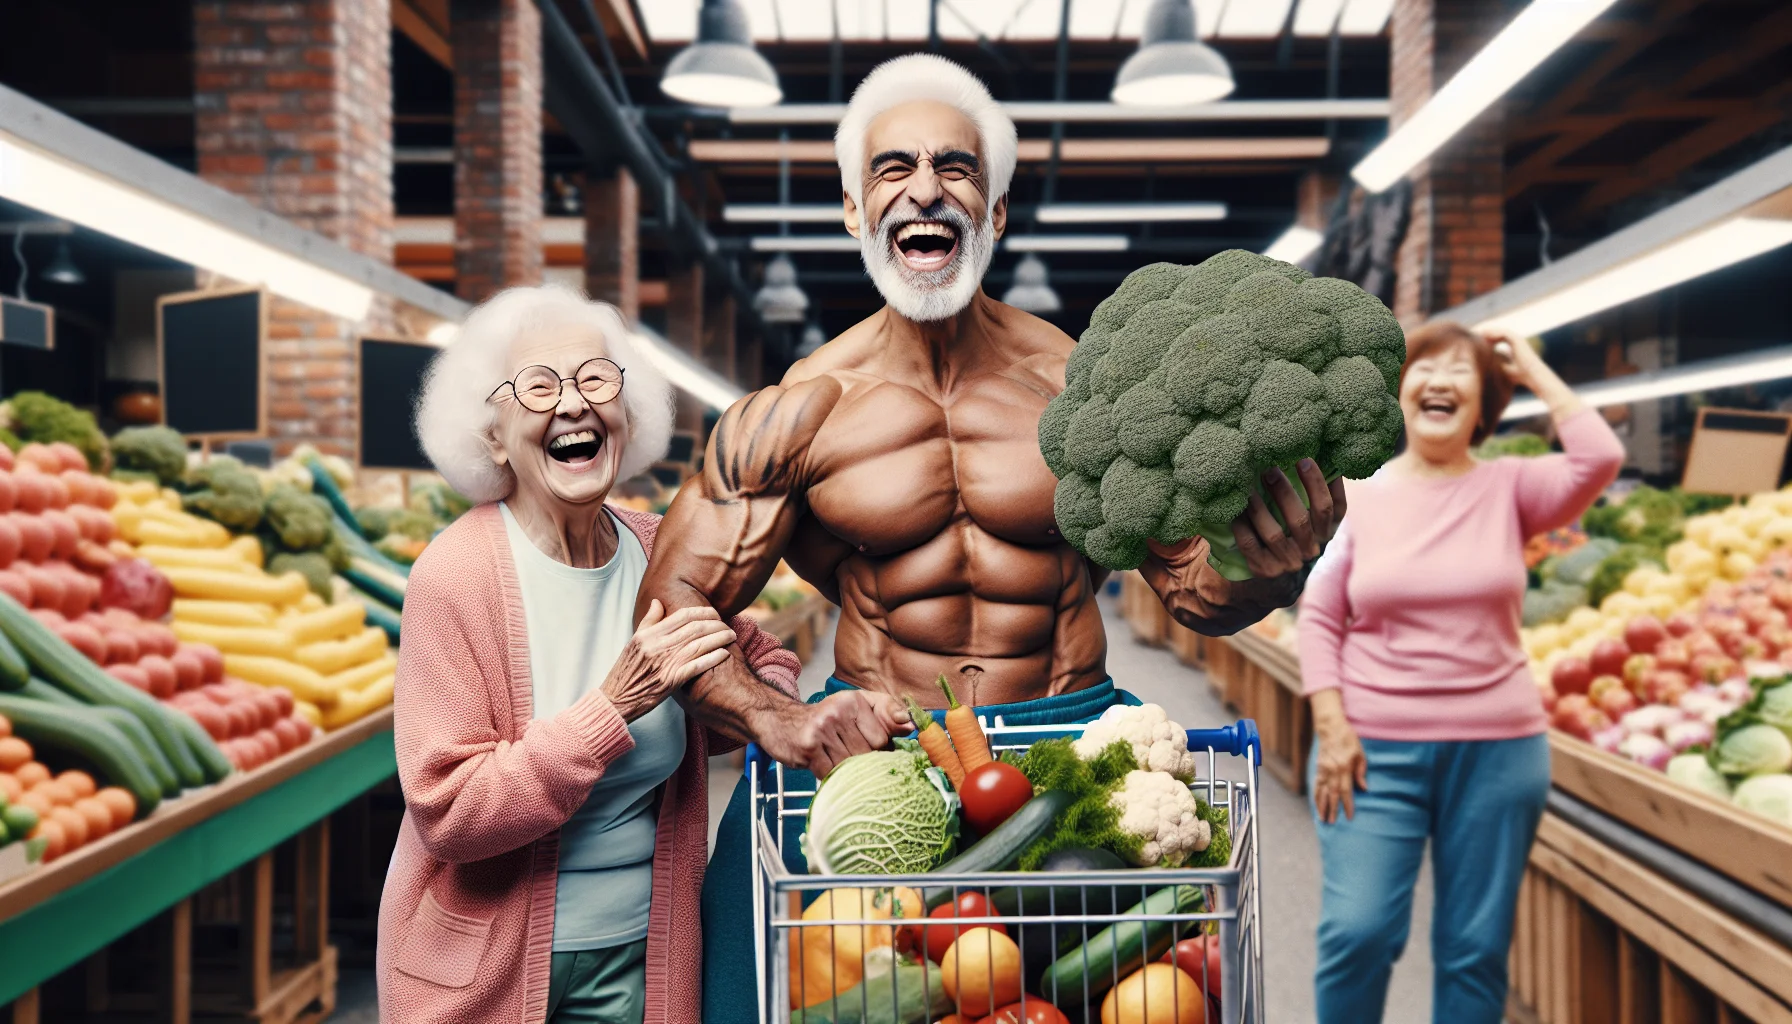 Create a humorous, realistic scene which illustrates positive aging. We see an elderly man of Hispanic descent, exhibiting a fit physique, merrily overstuffing his grannie shopping cart with vibrant, nutritious foods in a bustling marketplace. Beside him, a Caucasian elderly woman, laughing heartily, holds out a giant broccoli as if it's a trophy. Let the backdrop be filled with more elderly people of diverse descents like Black, Middle-Eastern, South Asian, all showing enjoyment in the pursuit of a healthy diet, adding a lively, happy mood to the setting. All are dressed in colorful casual wear for an added touch of energy.